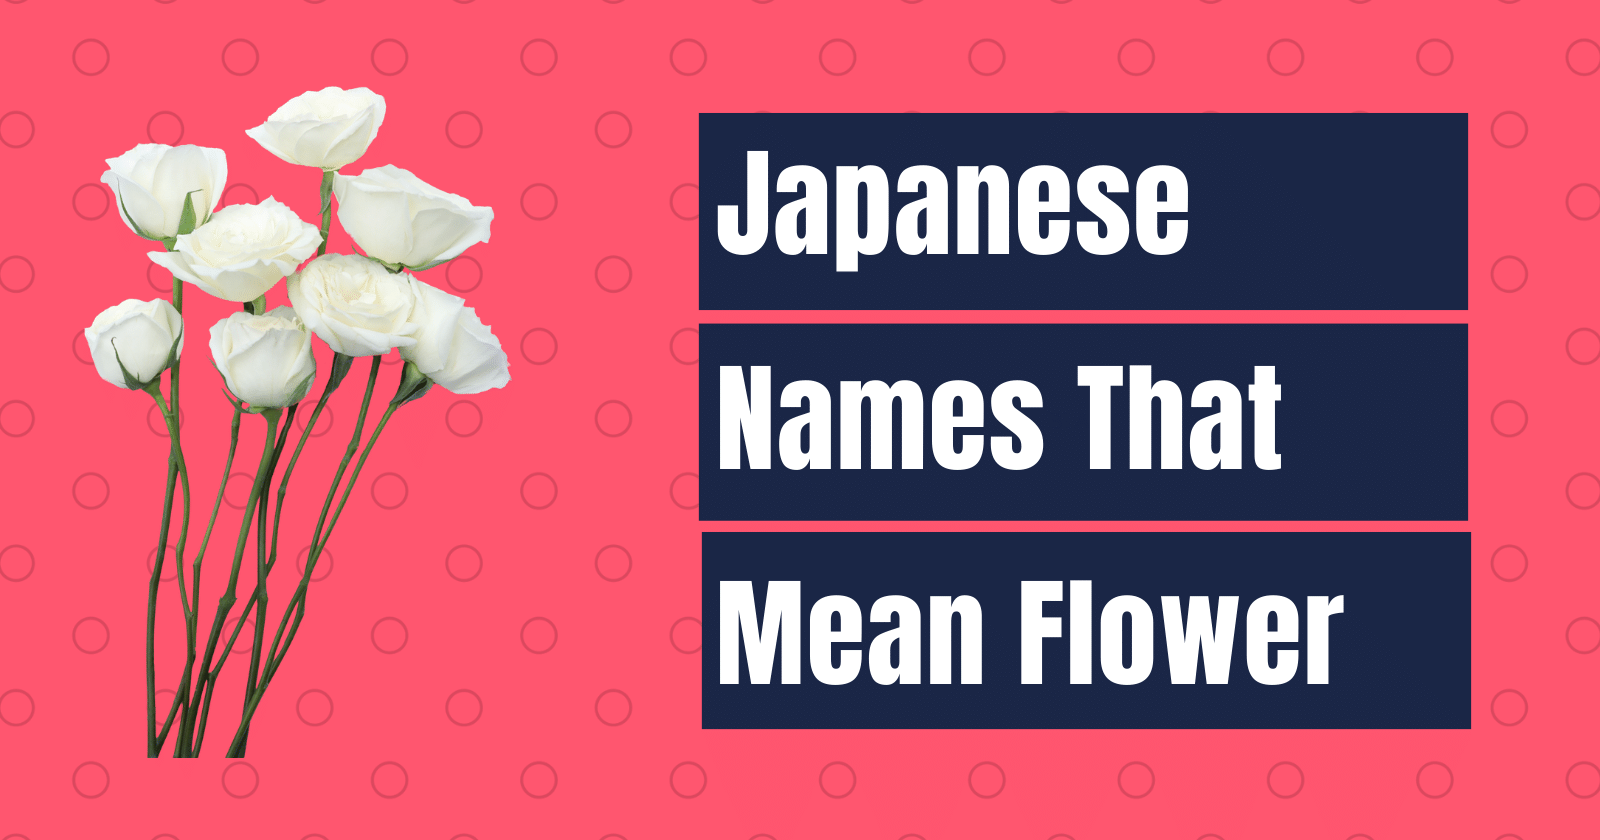 japanese names meaning flower